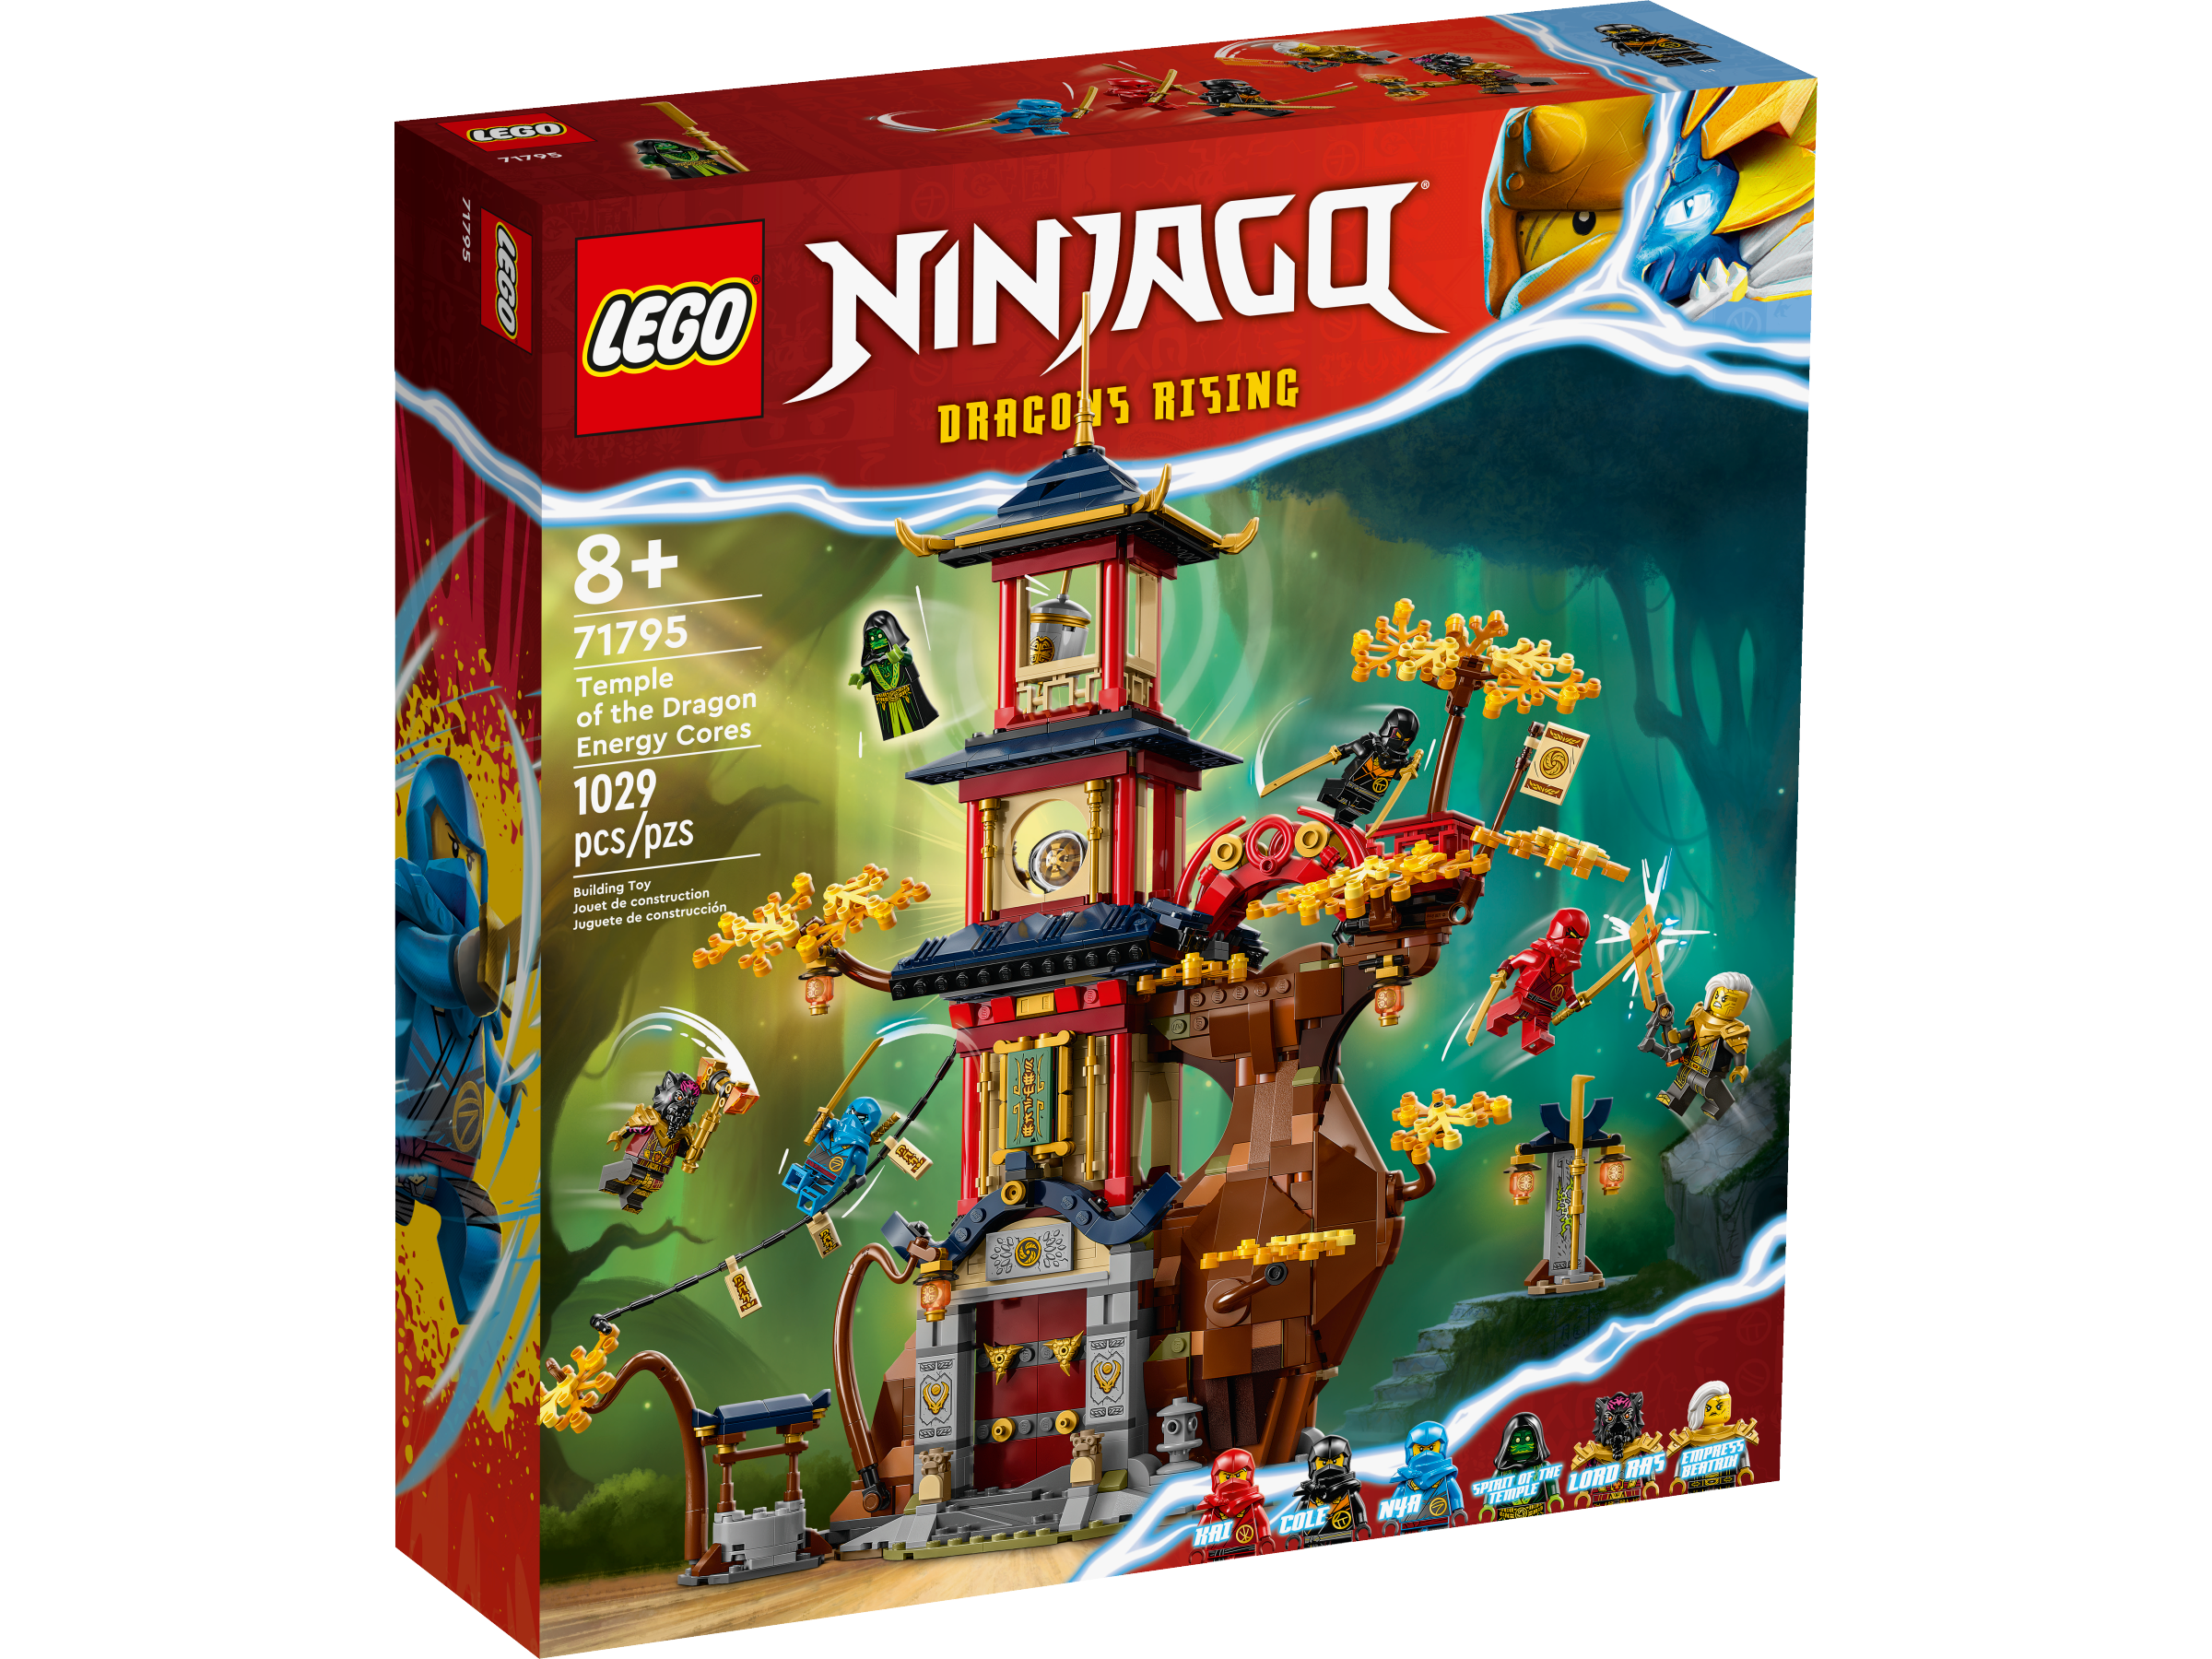 Temple of the Dragon Energy Cores 71795 | NINJAGO® | Buy online at